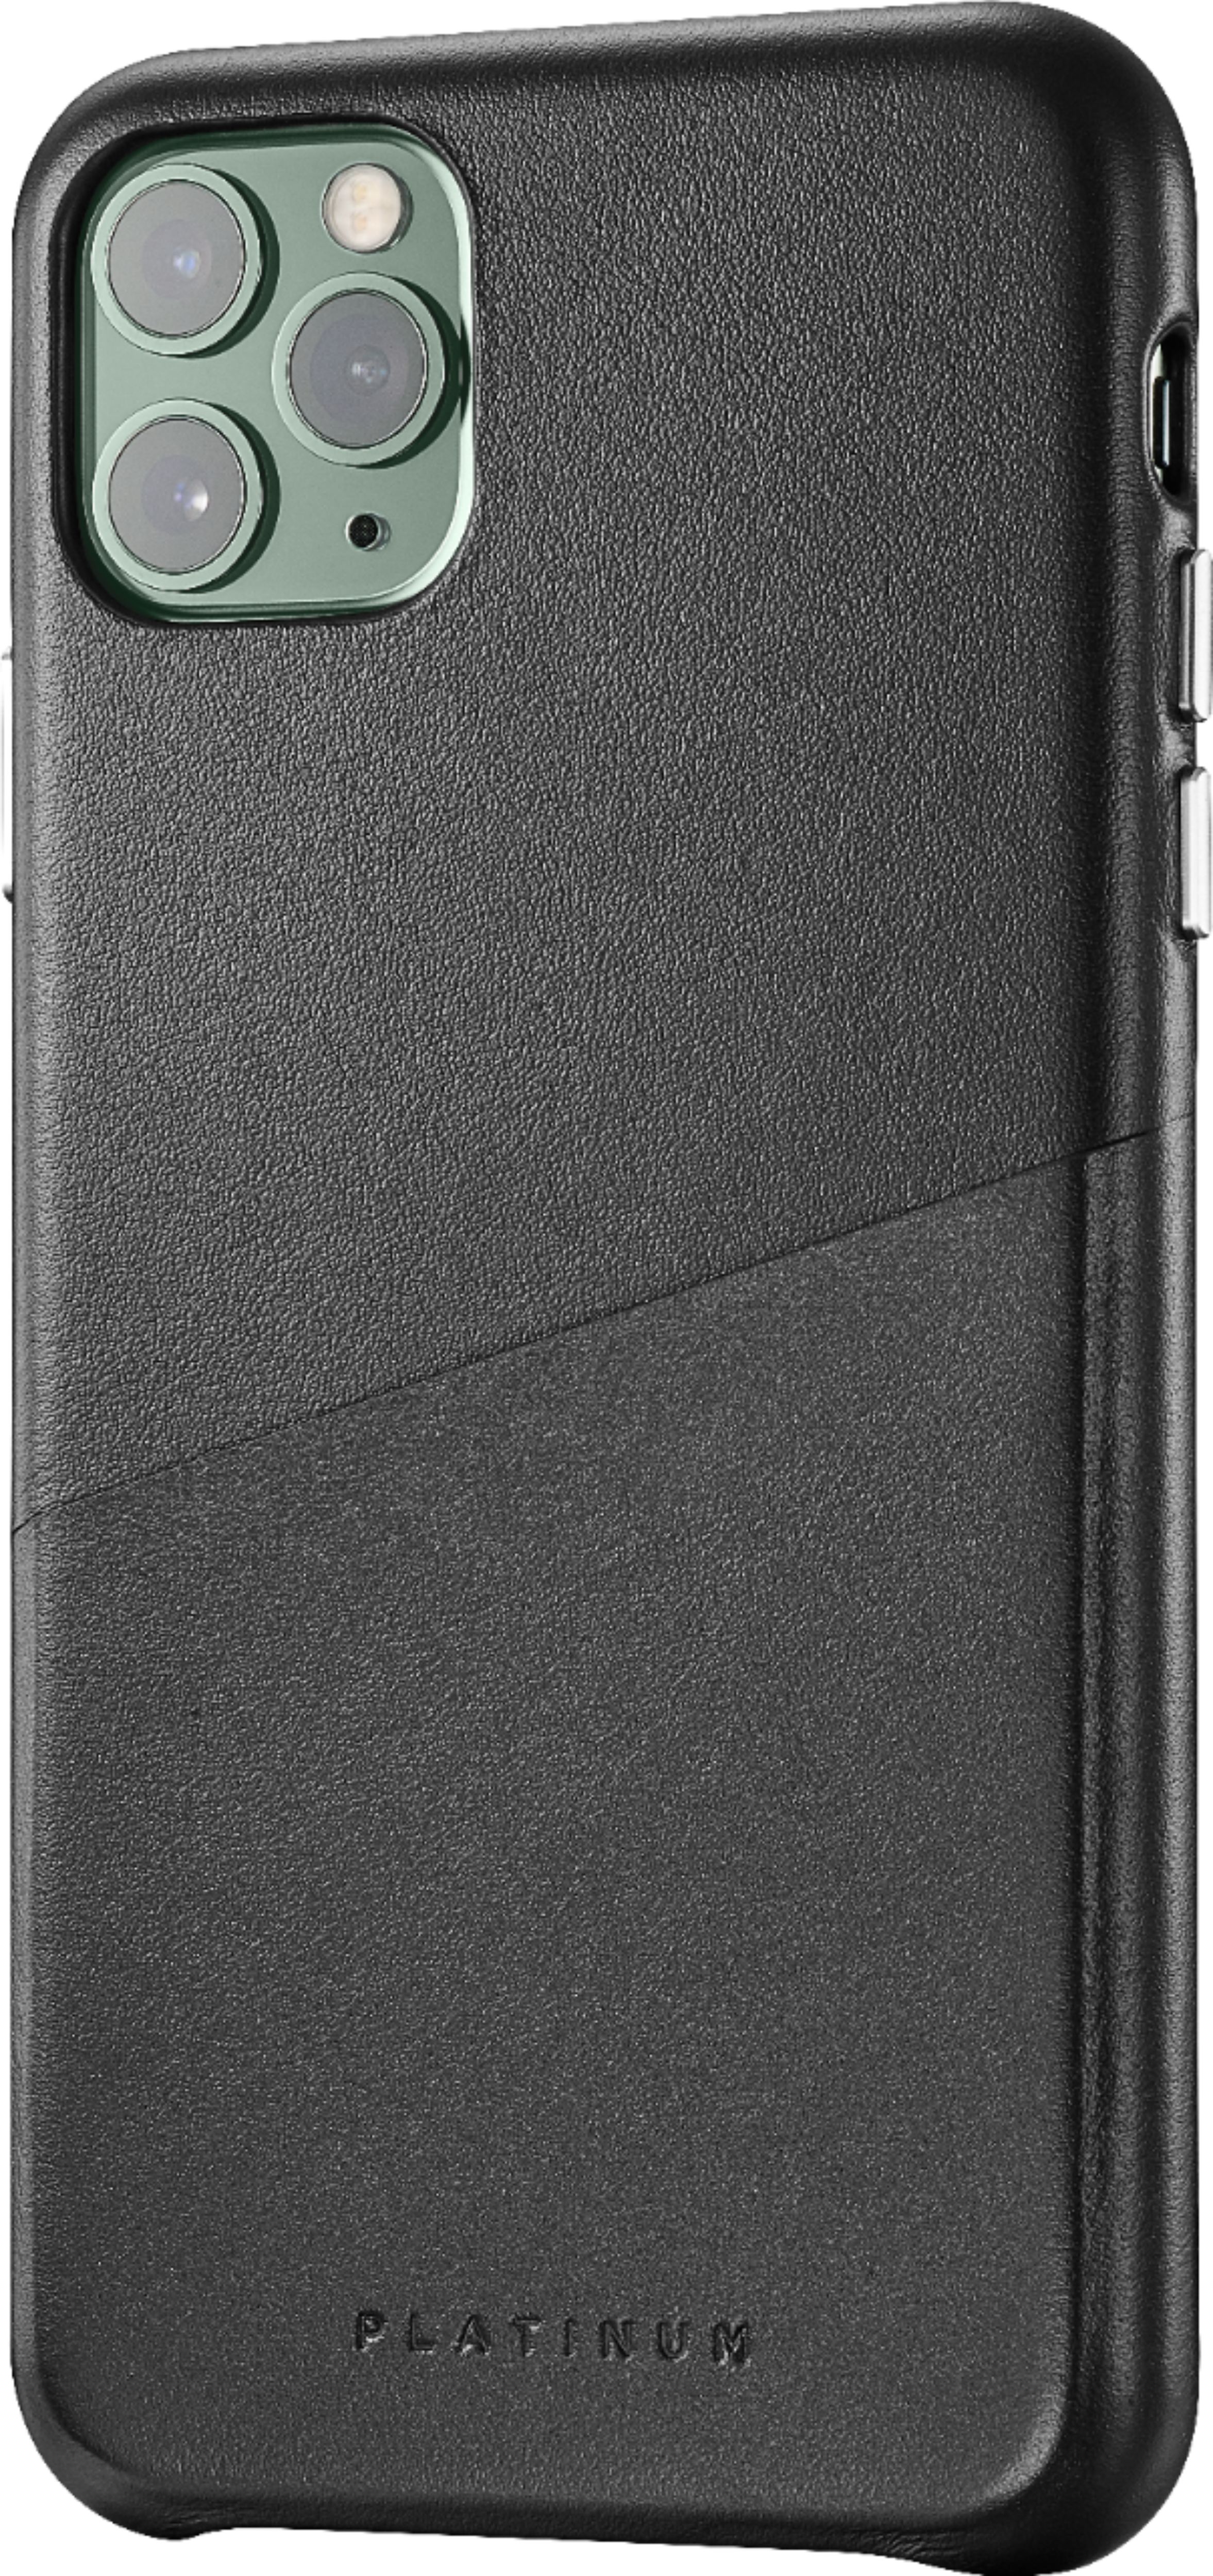 Platinum Leather Wallet Case For Apple Iphone 11 Pro Max Black Pt Maxilclbw Best Buy